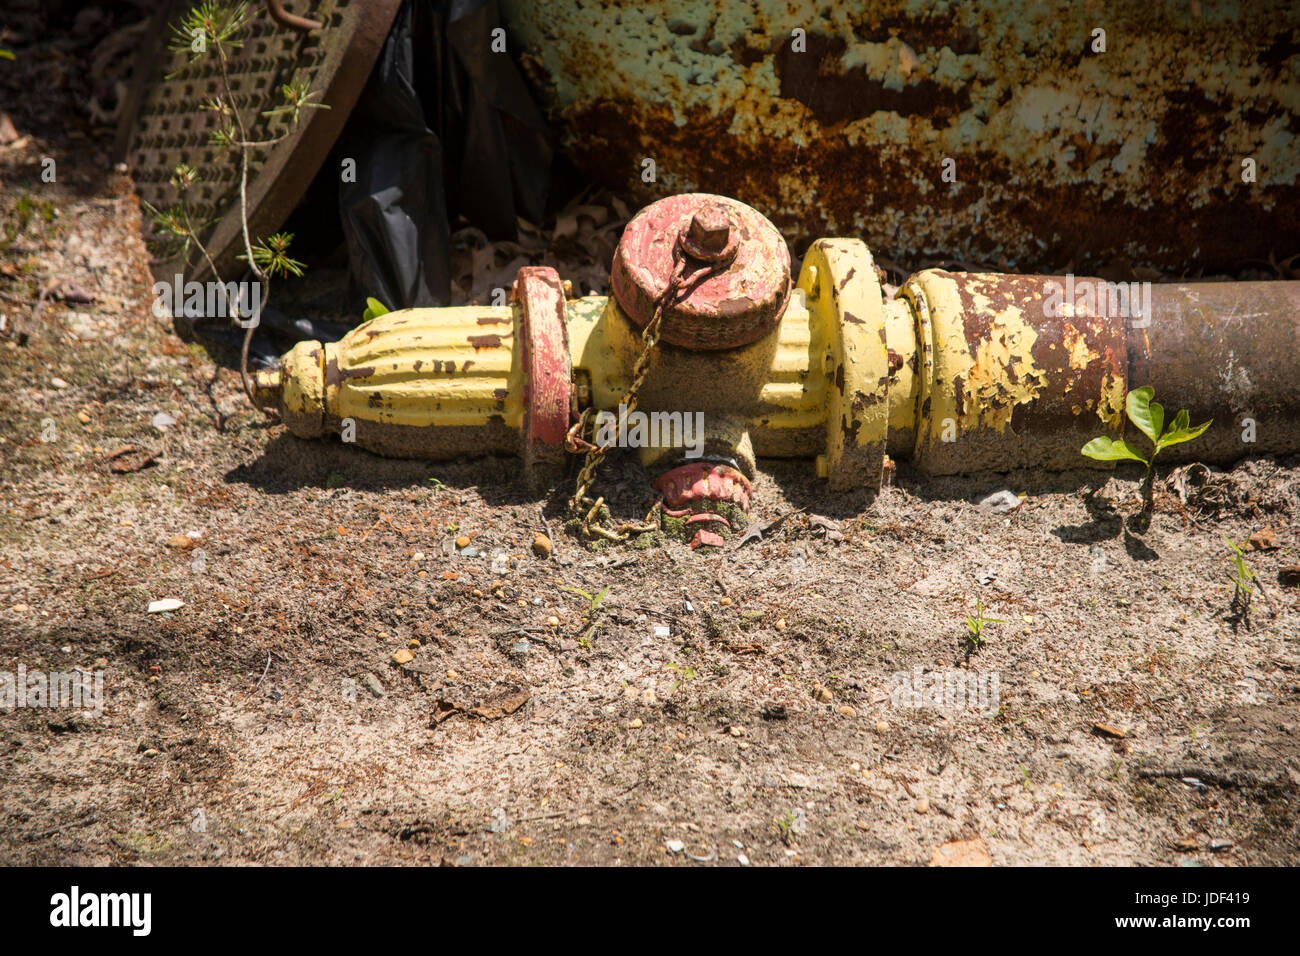 Fire hydrant partially buried in ground. Stock Photo